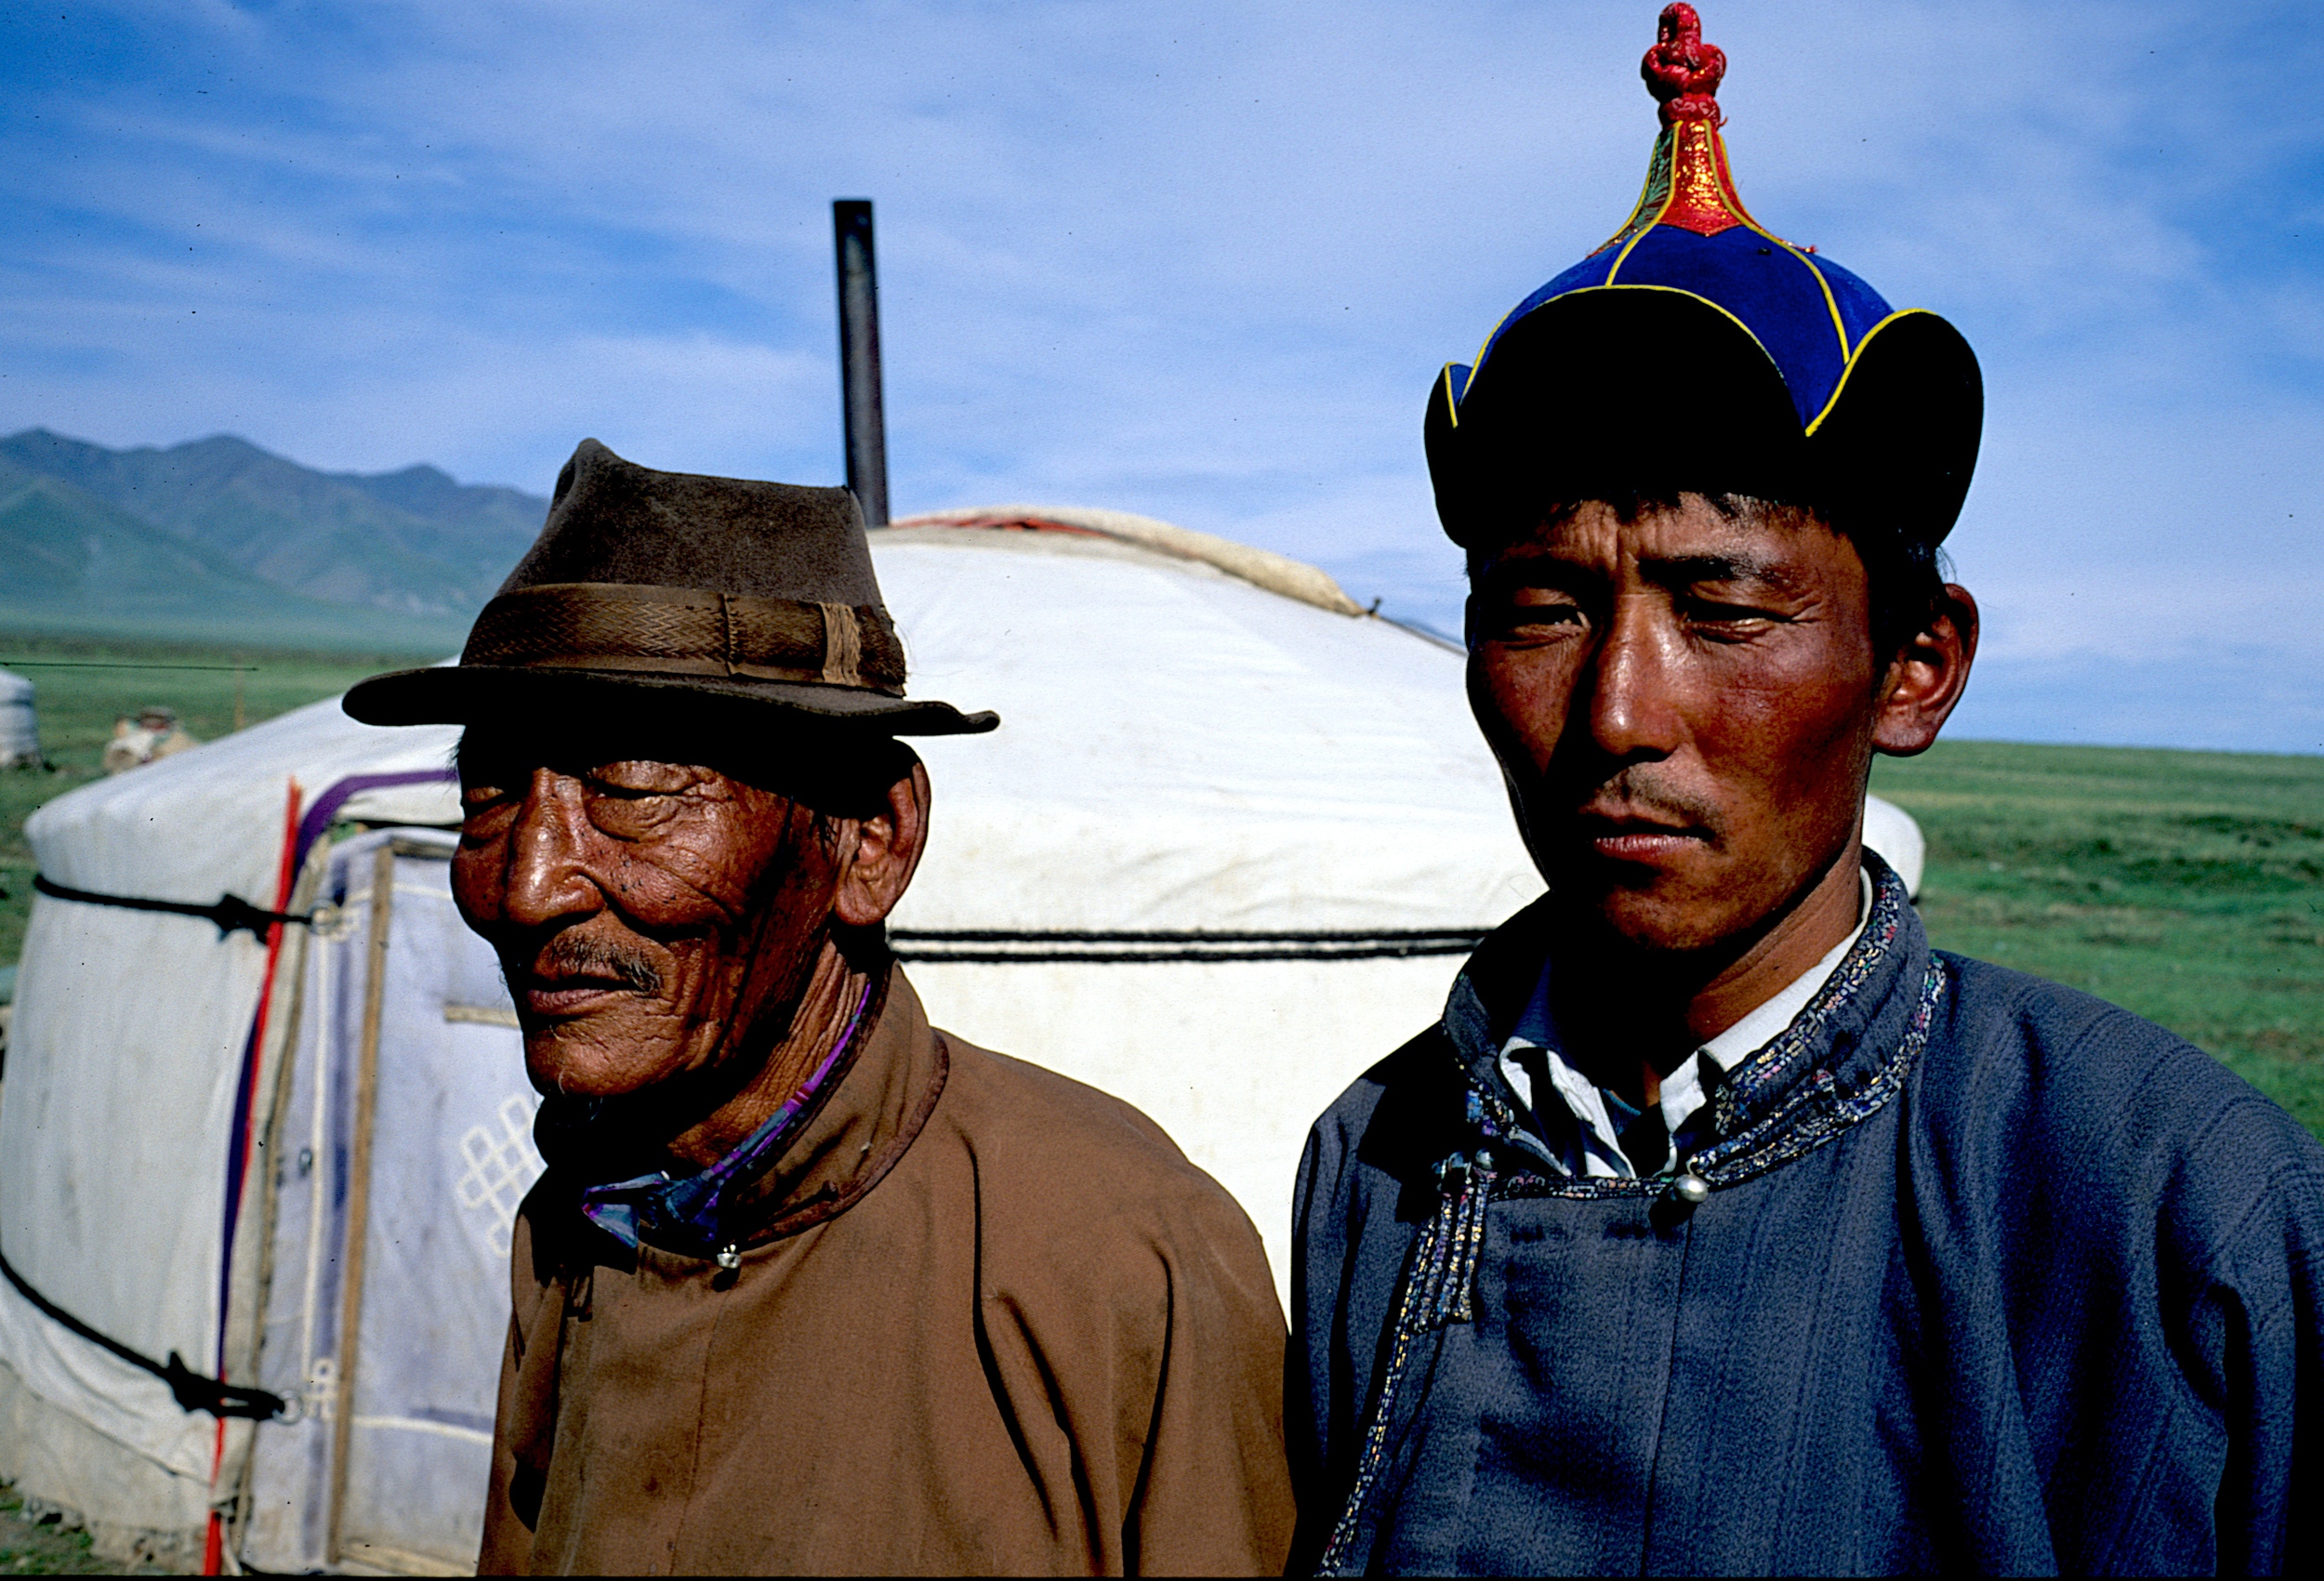 father and son mongolia.jpg